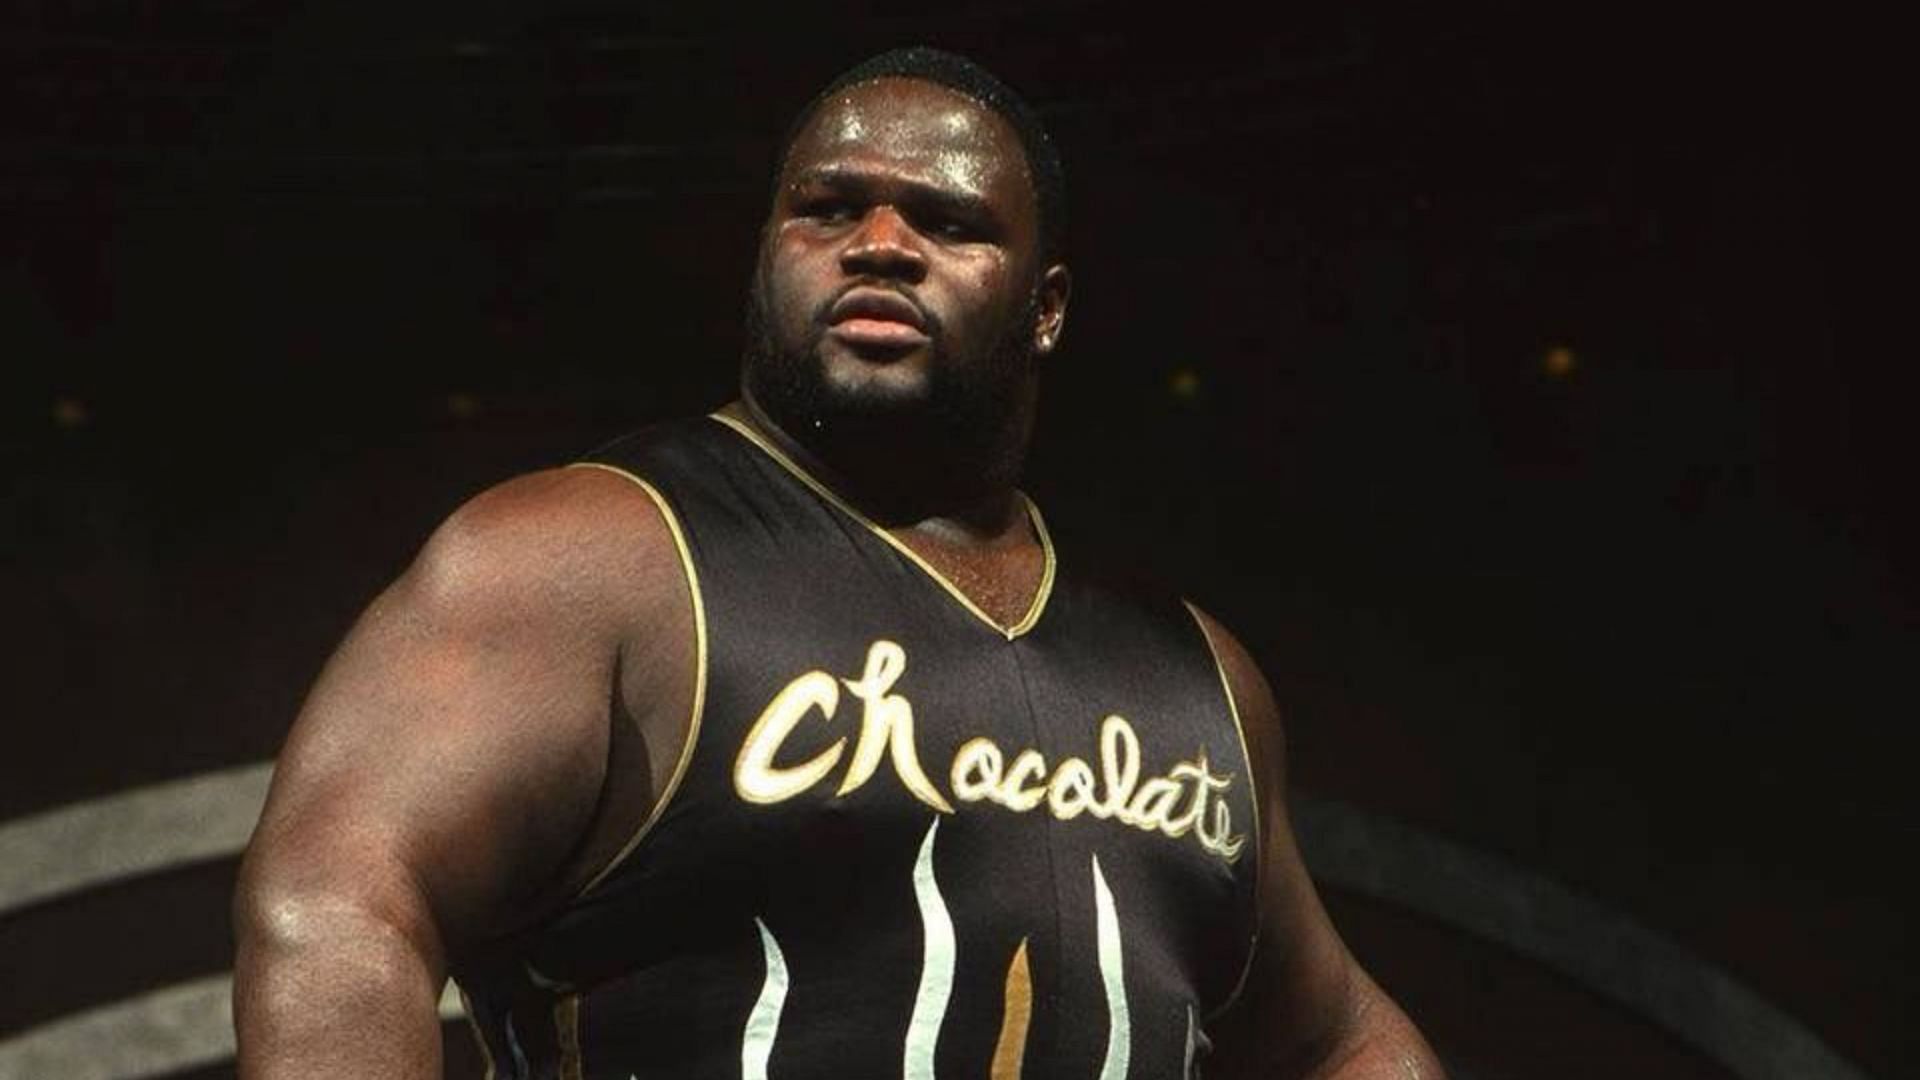 Mark Henry refused to do a storyline in 2003